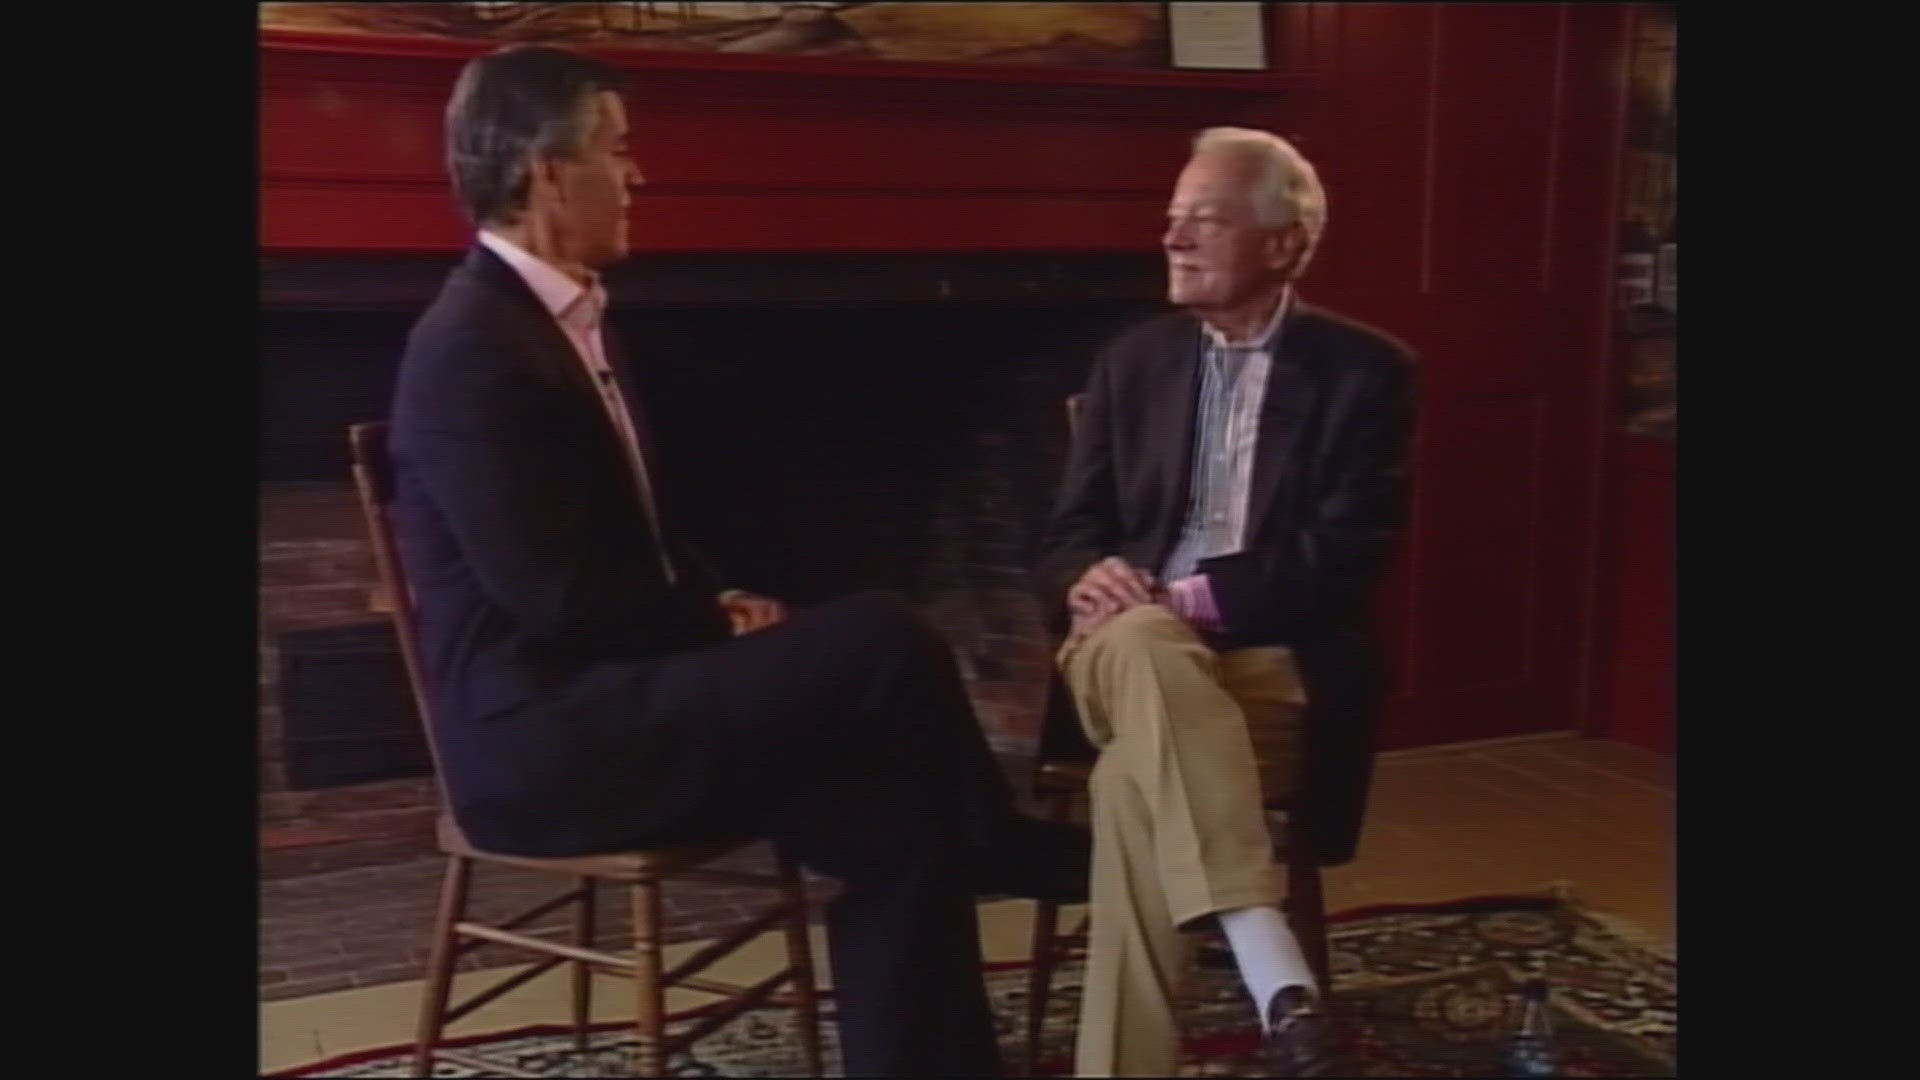 On one of the most infamous days in U.S. history, Bob Schieffer got an unexpected phone call that led to an even more unexpected event.